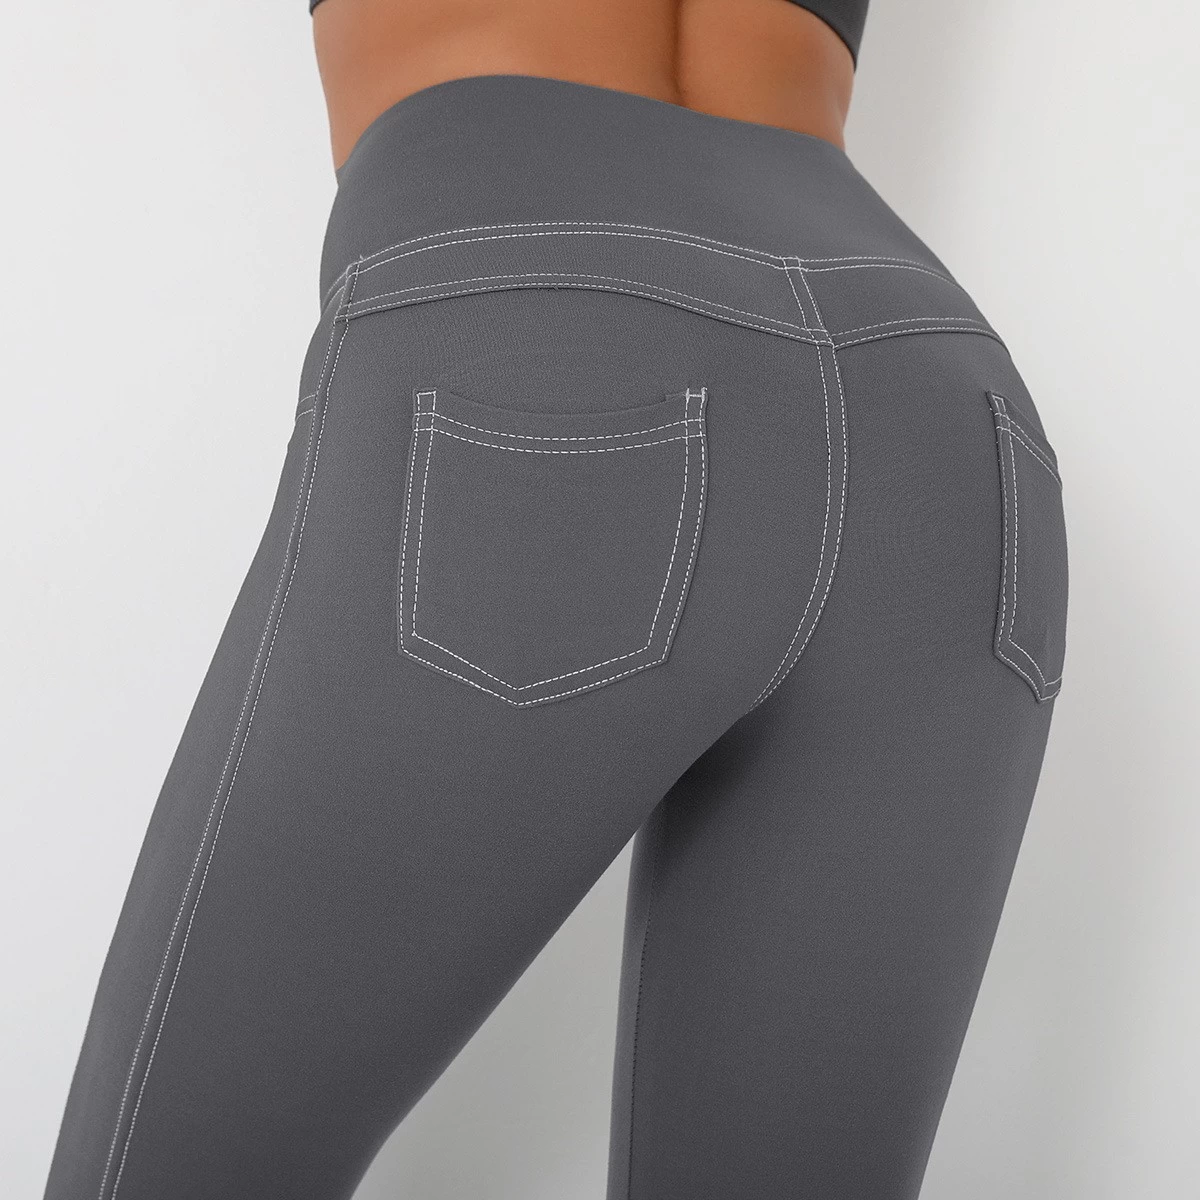 S-SHAPER Seamless High Waist Imitate Jeans Print Leggings Push Up Fashion Pants for Women Athleisure Nudity Fitness Yoga Leggings With pockets